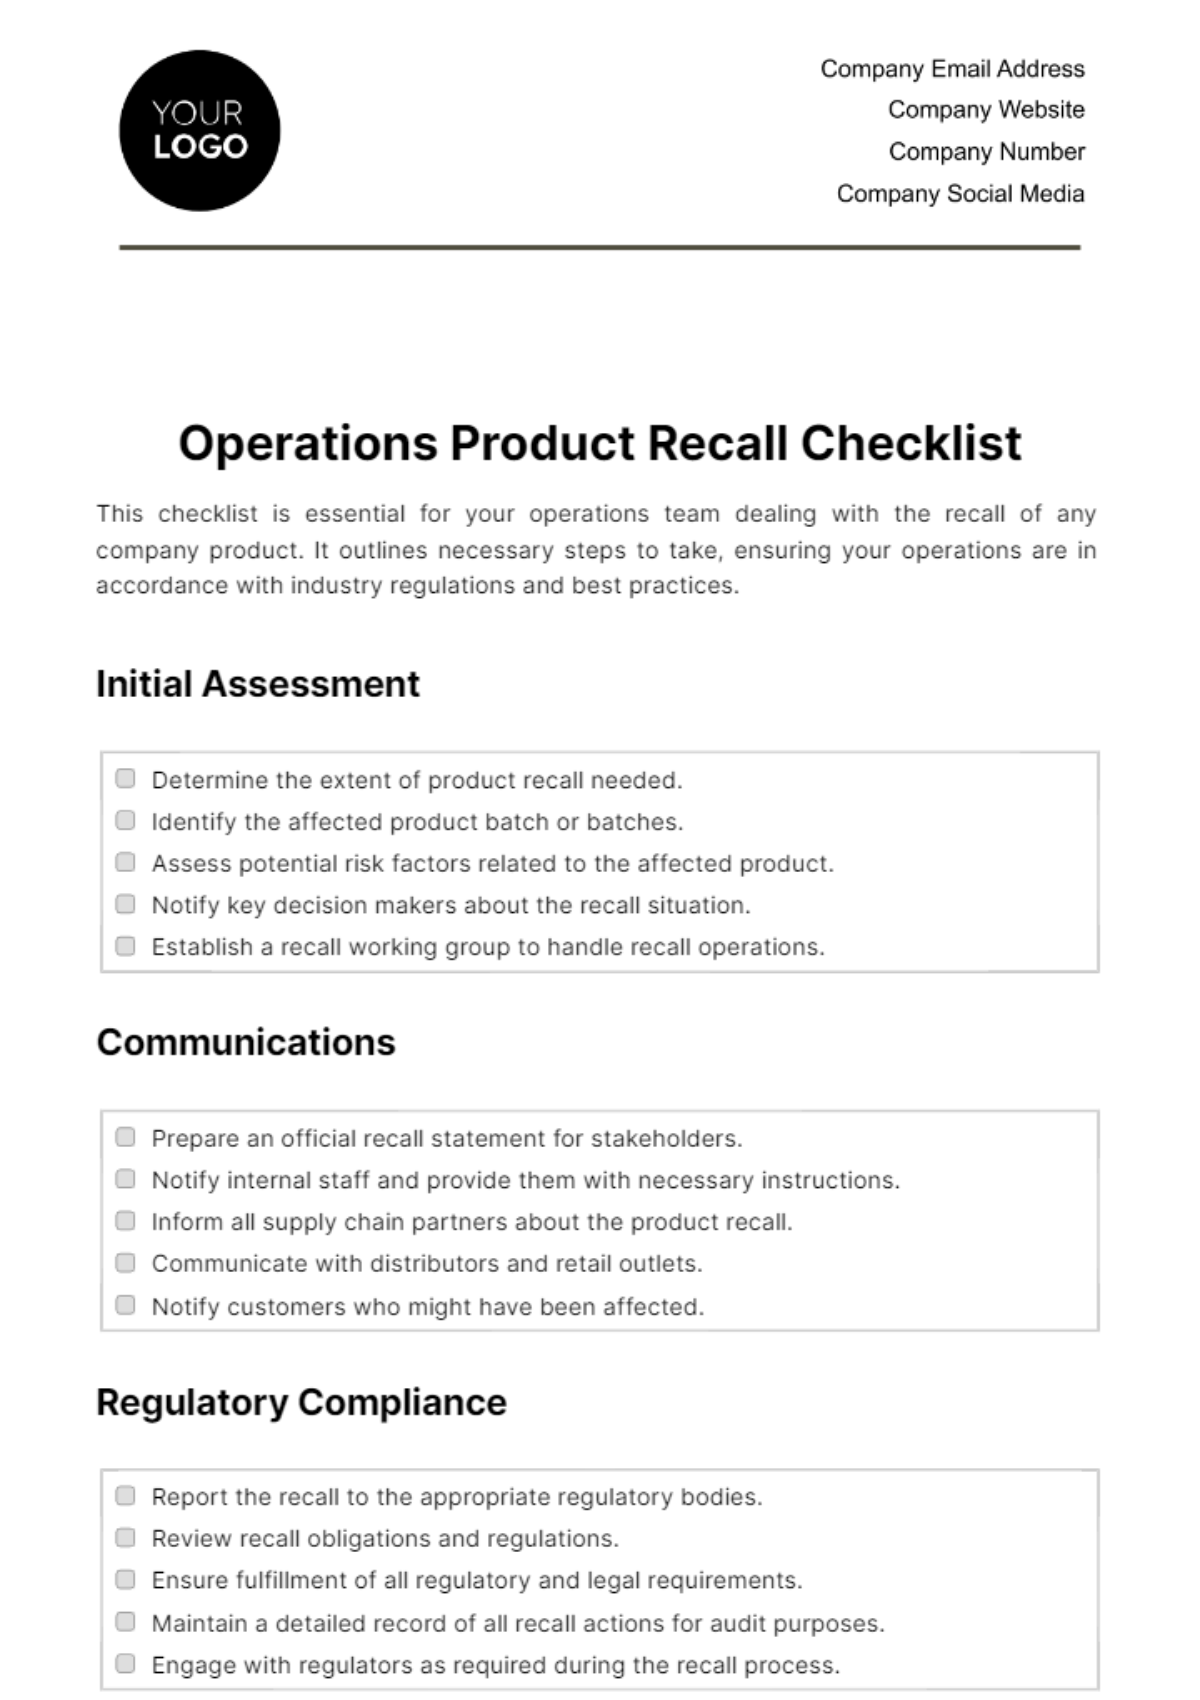 Operations Product Recall Checklist Template